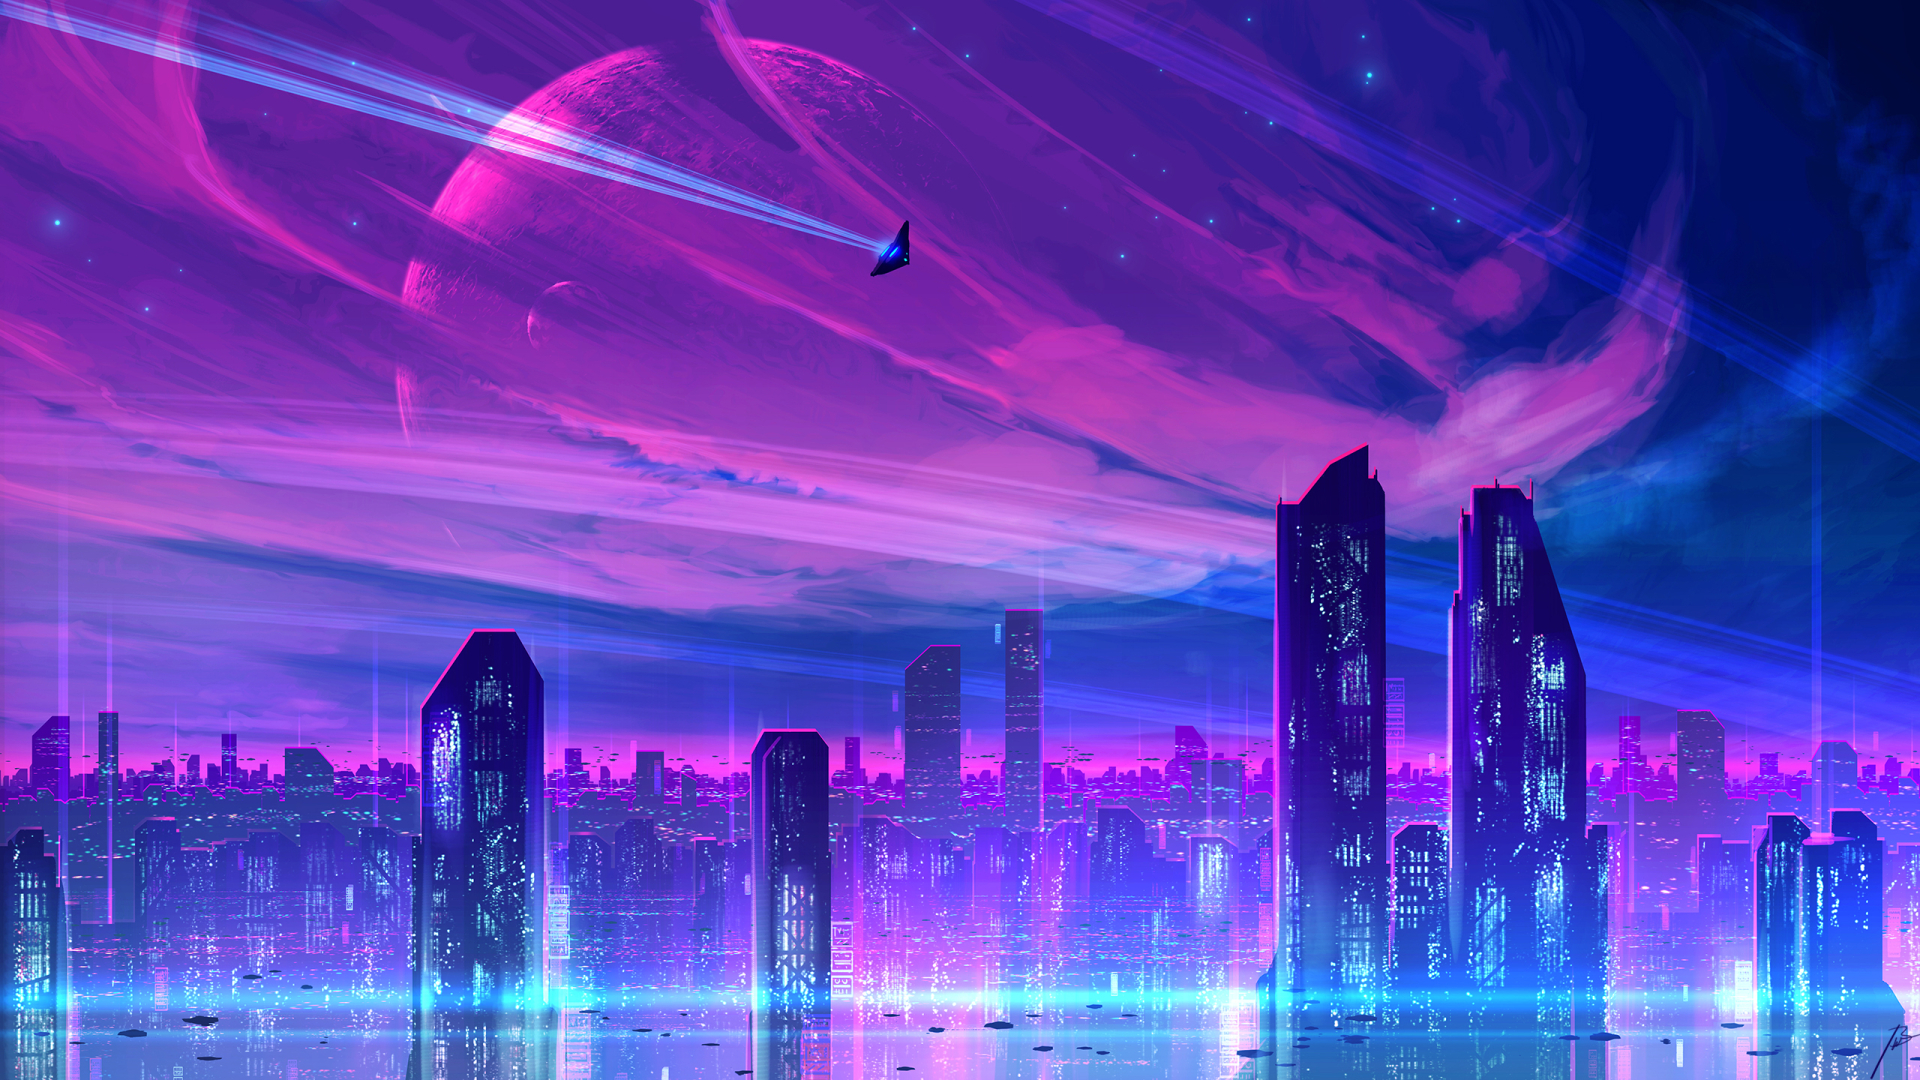 Wallpaper city, lights, future, night, cyberpunk, skyscrapers, hologram  images for desktop, section фантастика - download